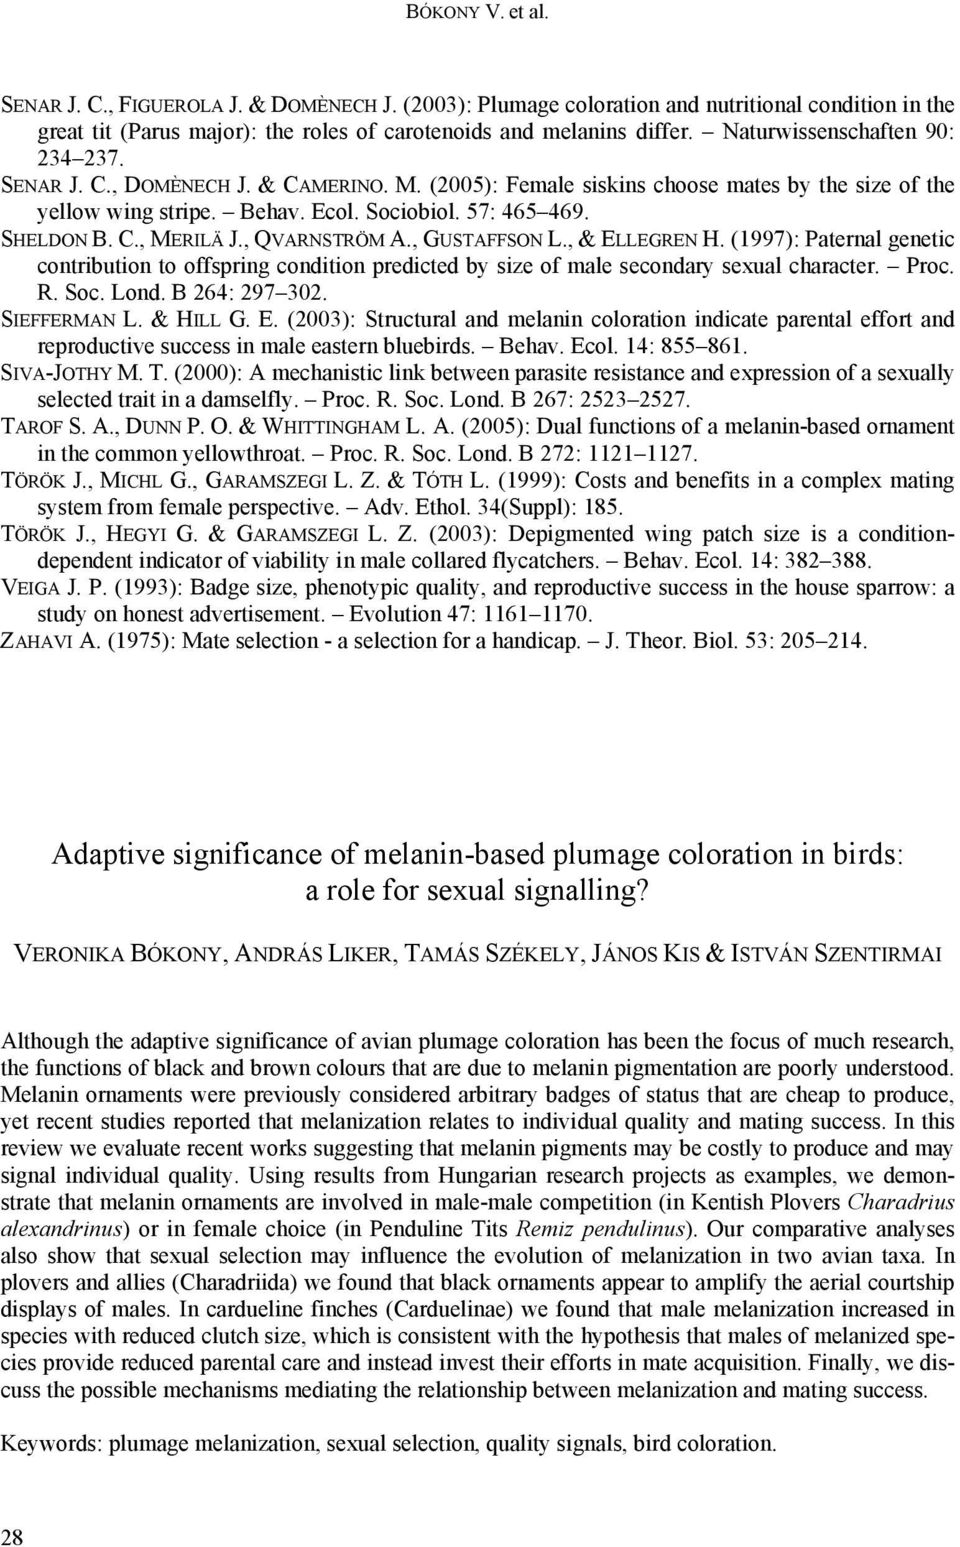 , QVARNSTRÖM A., GUSTAFFSON L., & ELLEGREN H. (1997): Paternal genetic contribution to offspring condition predicted by size of male secondary sexual character. Proc. R. Soc. Lond. B 264: 297 302.